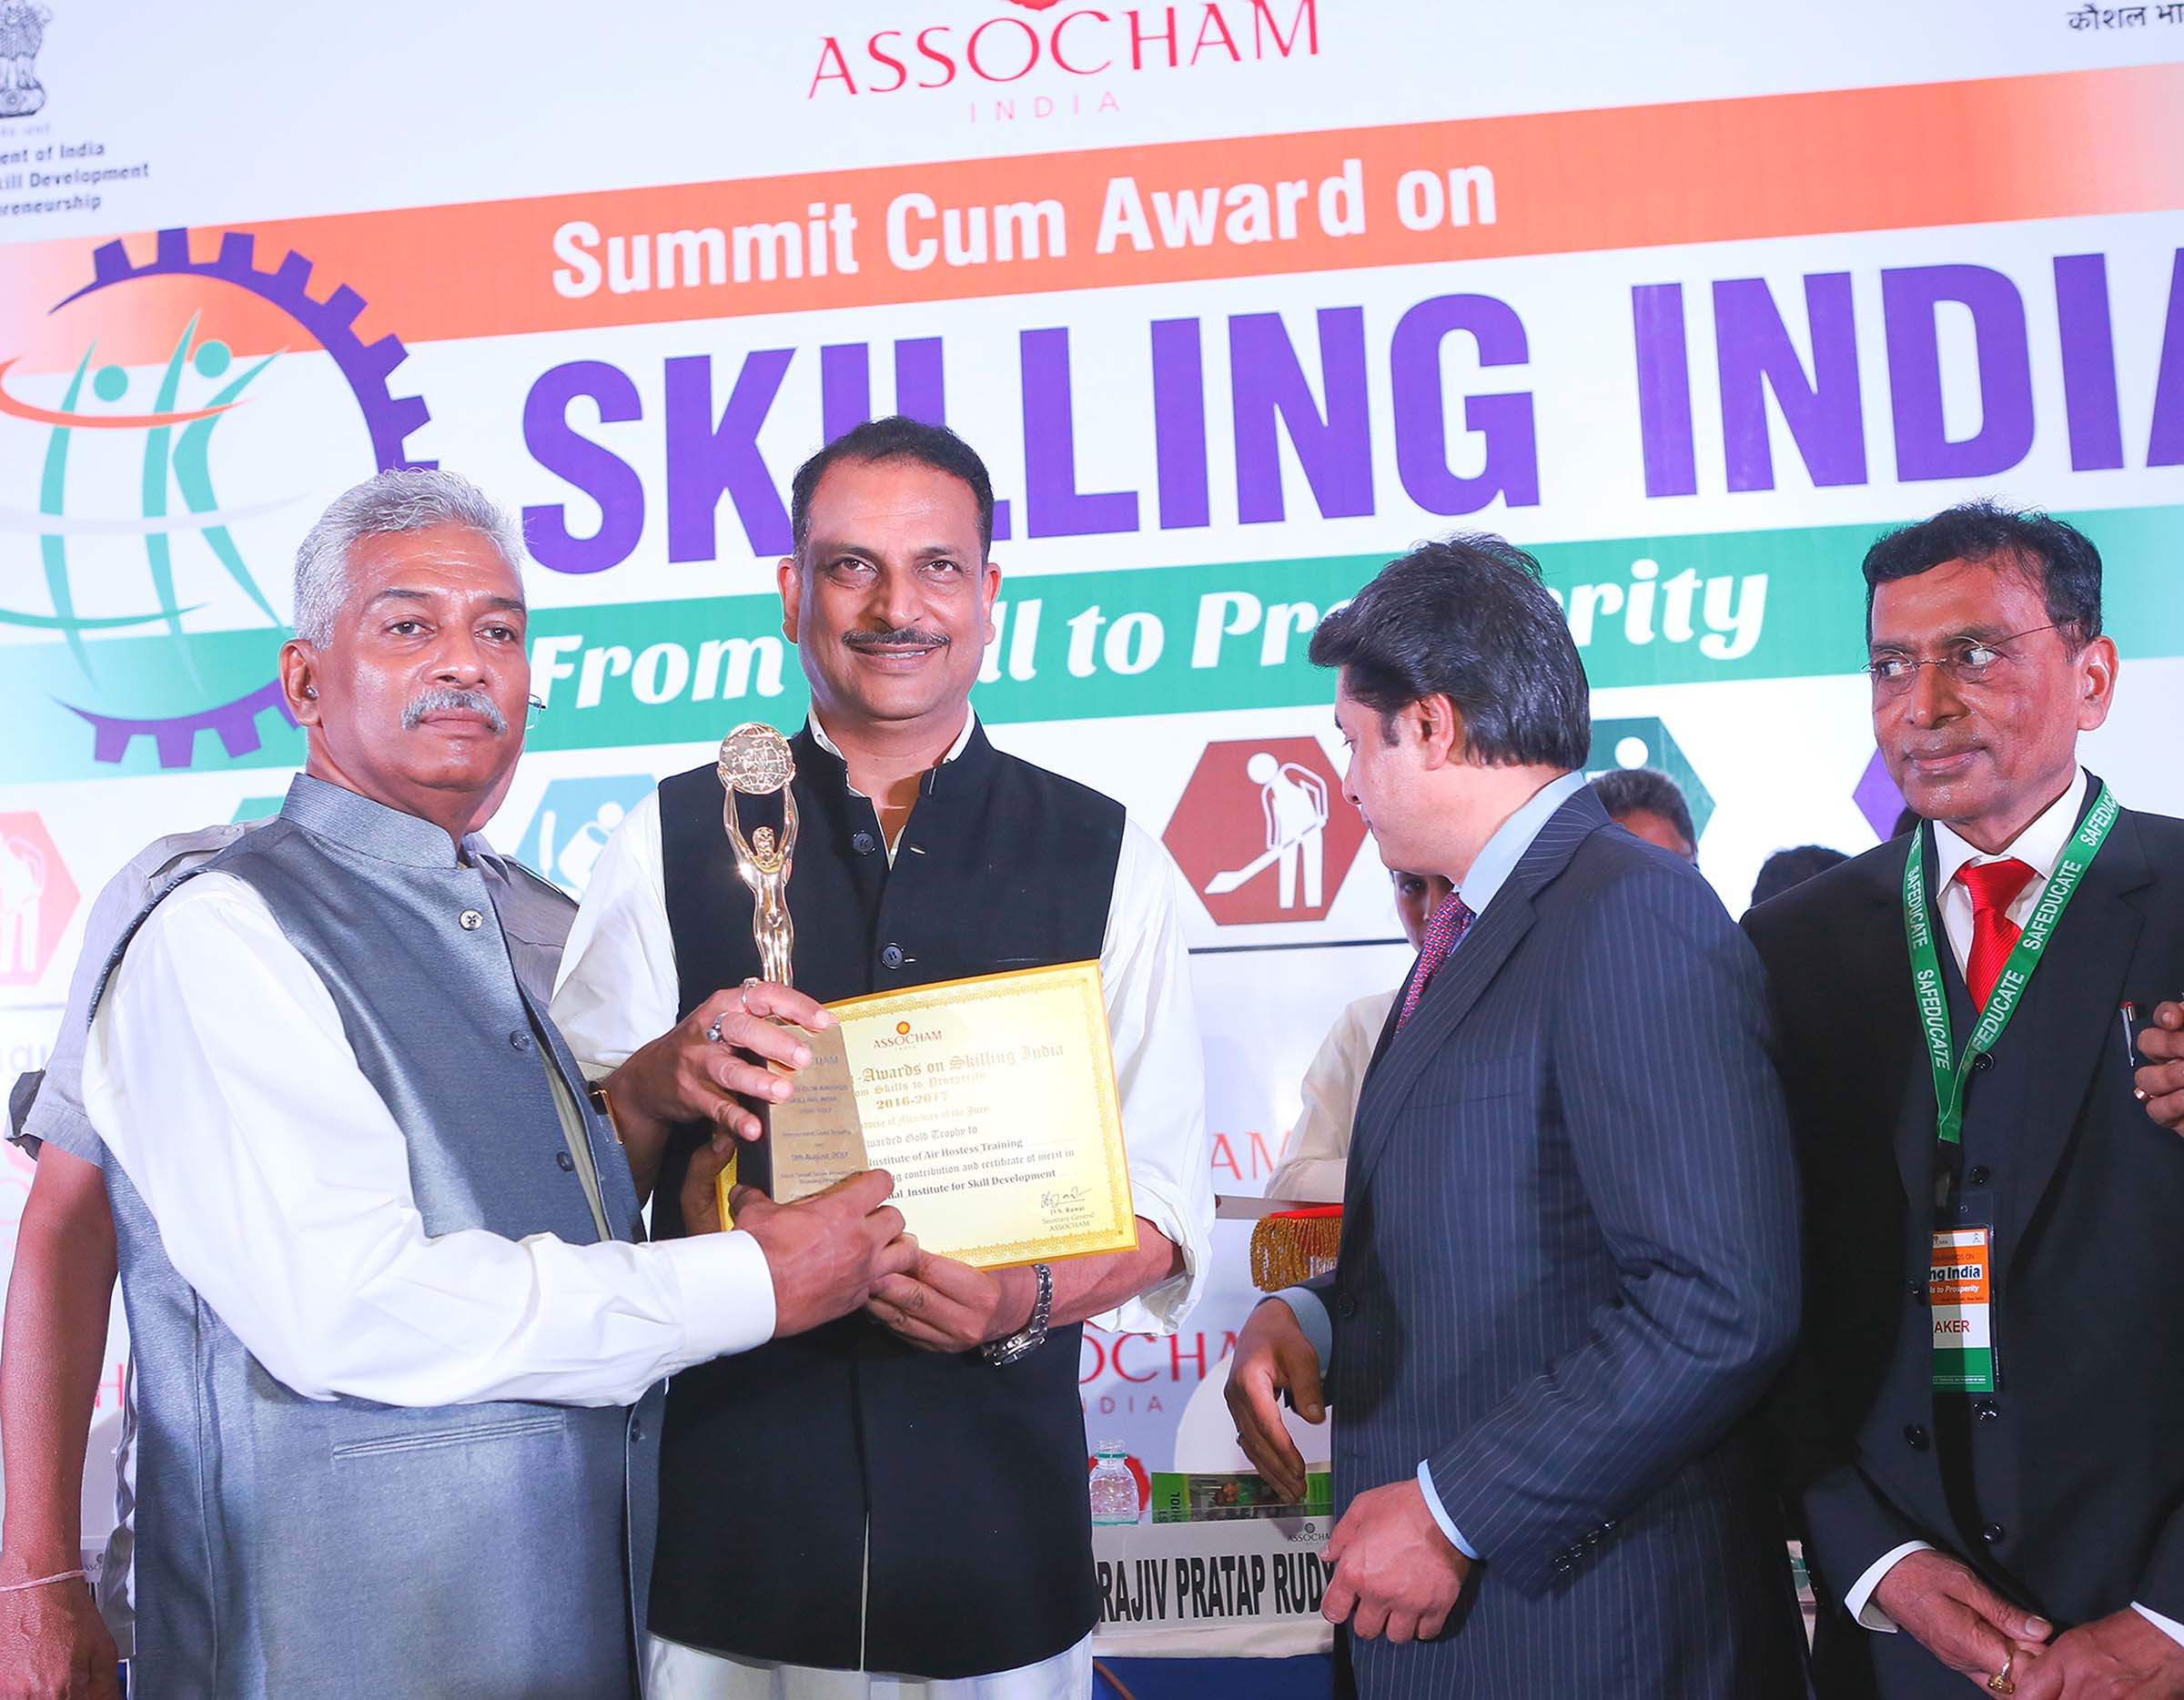 Frankfinn receives the Gold Award for “Best Higher Vocational Institute for Skill Development”– 2017 at the ASSOCHAM INDIA Summit 2017